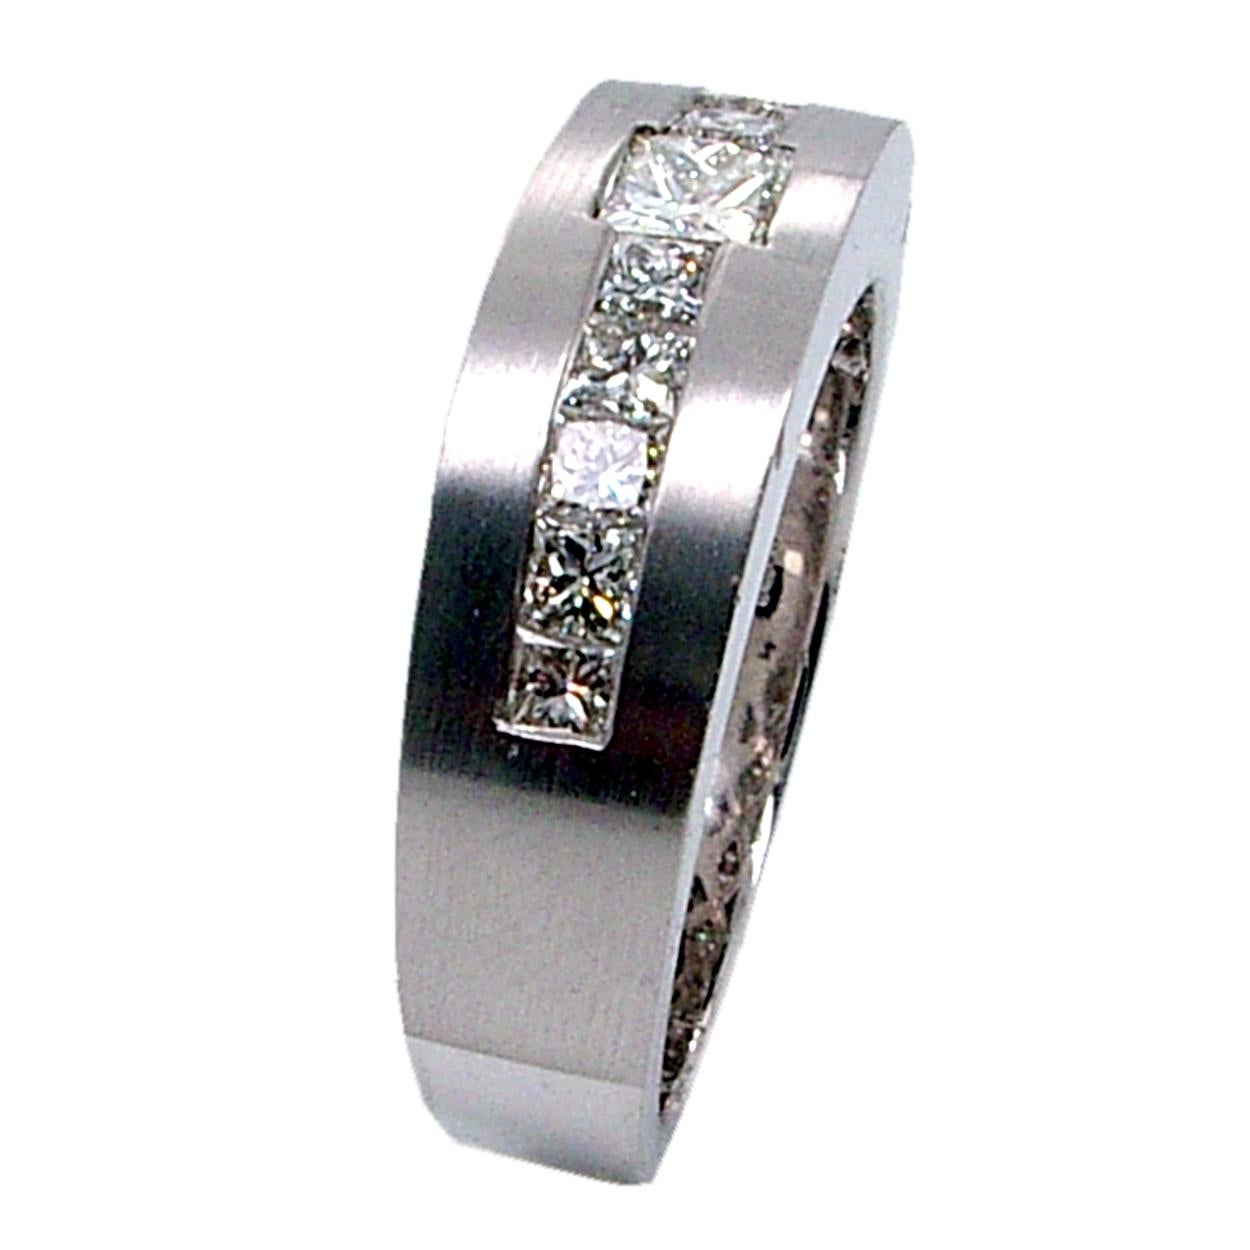 This Beautiful Gent's ring is made in 18K white gold with mat finish top. It has 10 pieces of 2.3 mm and 1 pieces of 4.2 mm Princess Cut Diamonds(Total Weight 1.29 Ct) Channel set on the top. 
Total Diamond Weight: 1.29 Ct VS2-SI1/G-H
Total Weight